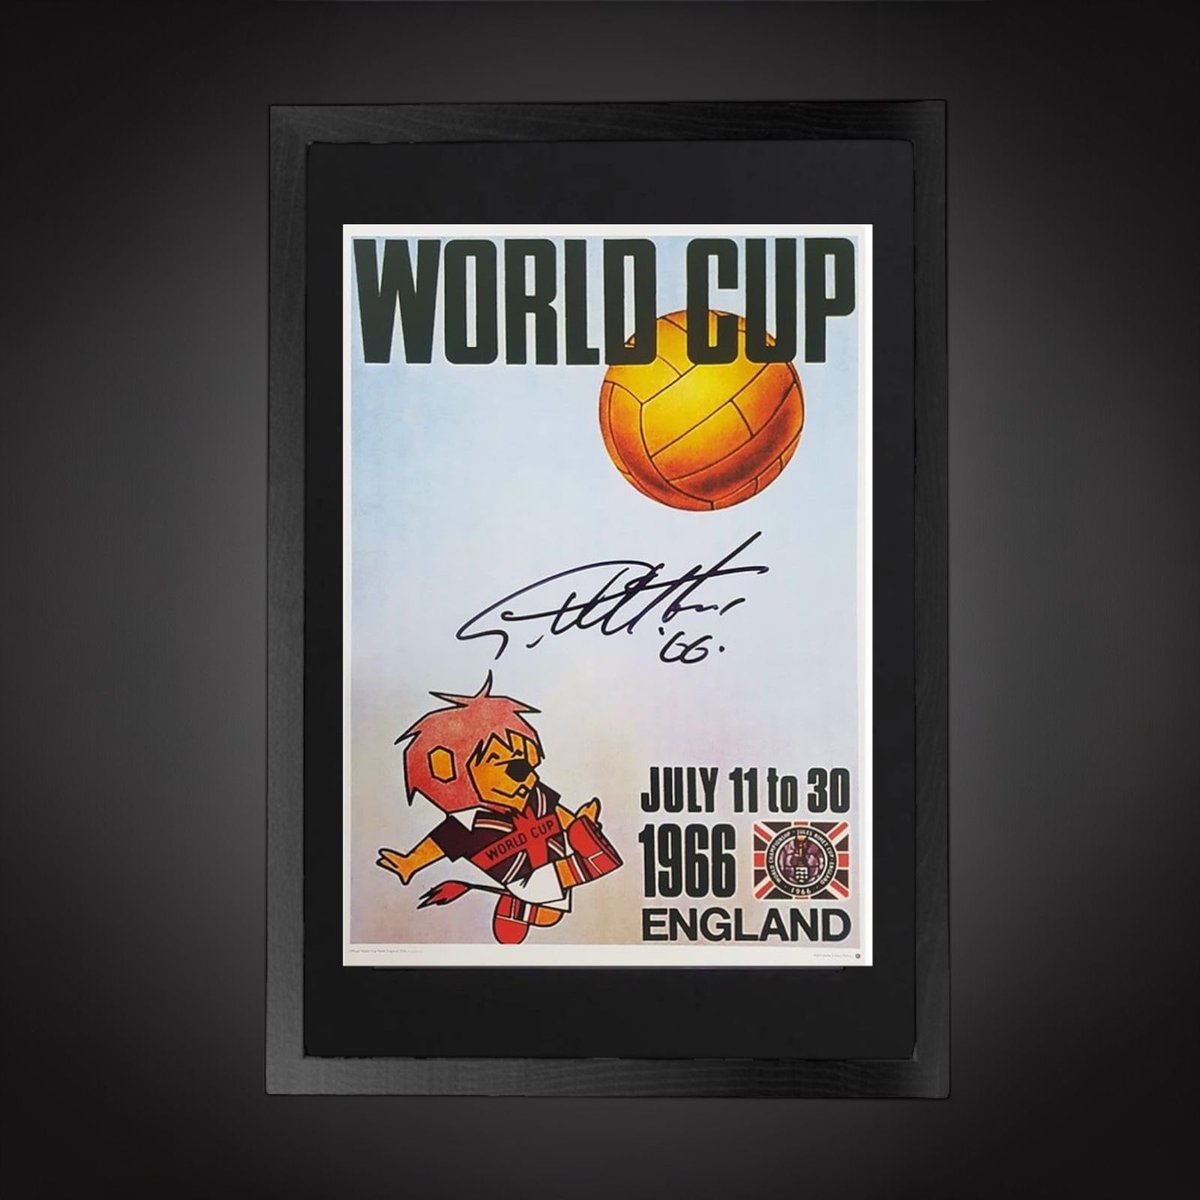 Anyone that would like one of these huge World Cup Willie posters signed and framed with a dedication to your name can get it from terry@a1sportingspeakers.com 07973387294 for £99 delivered or £55 unframed